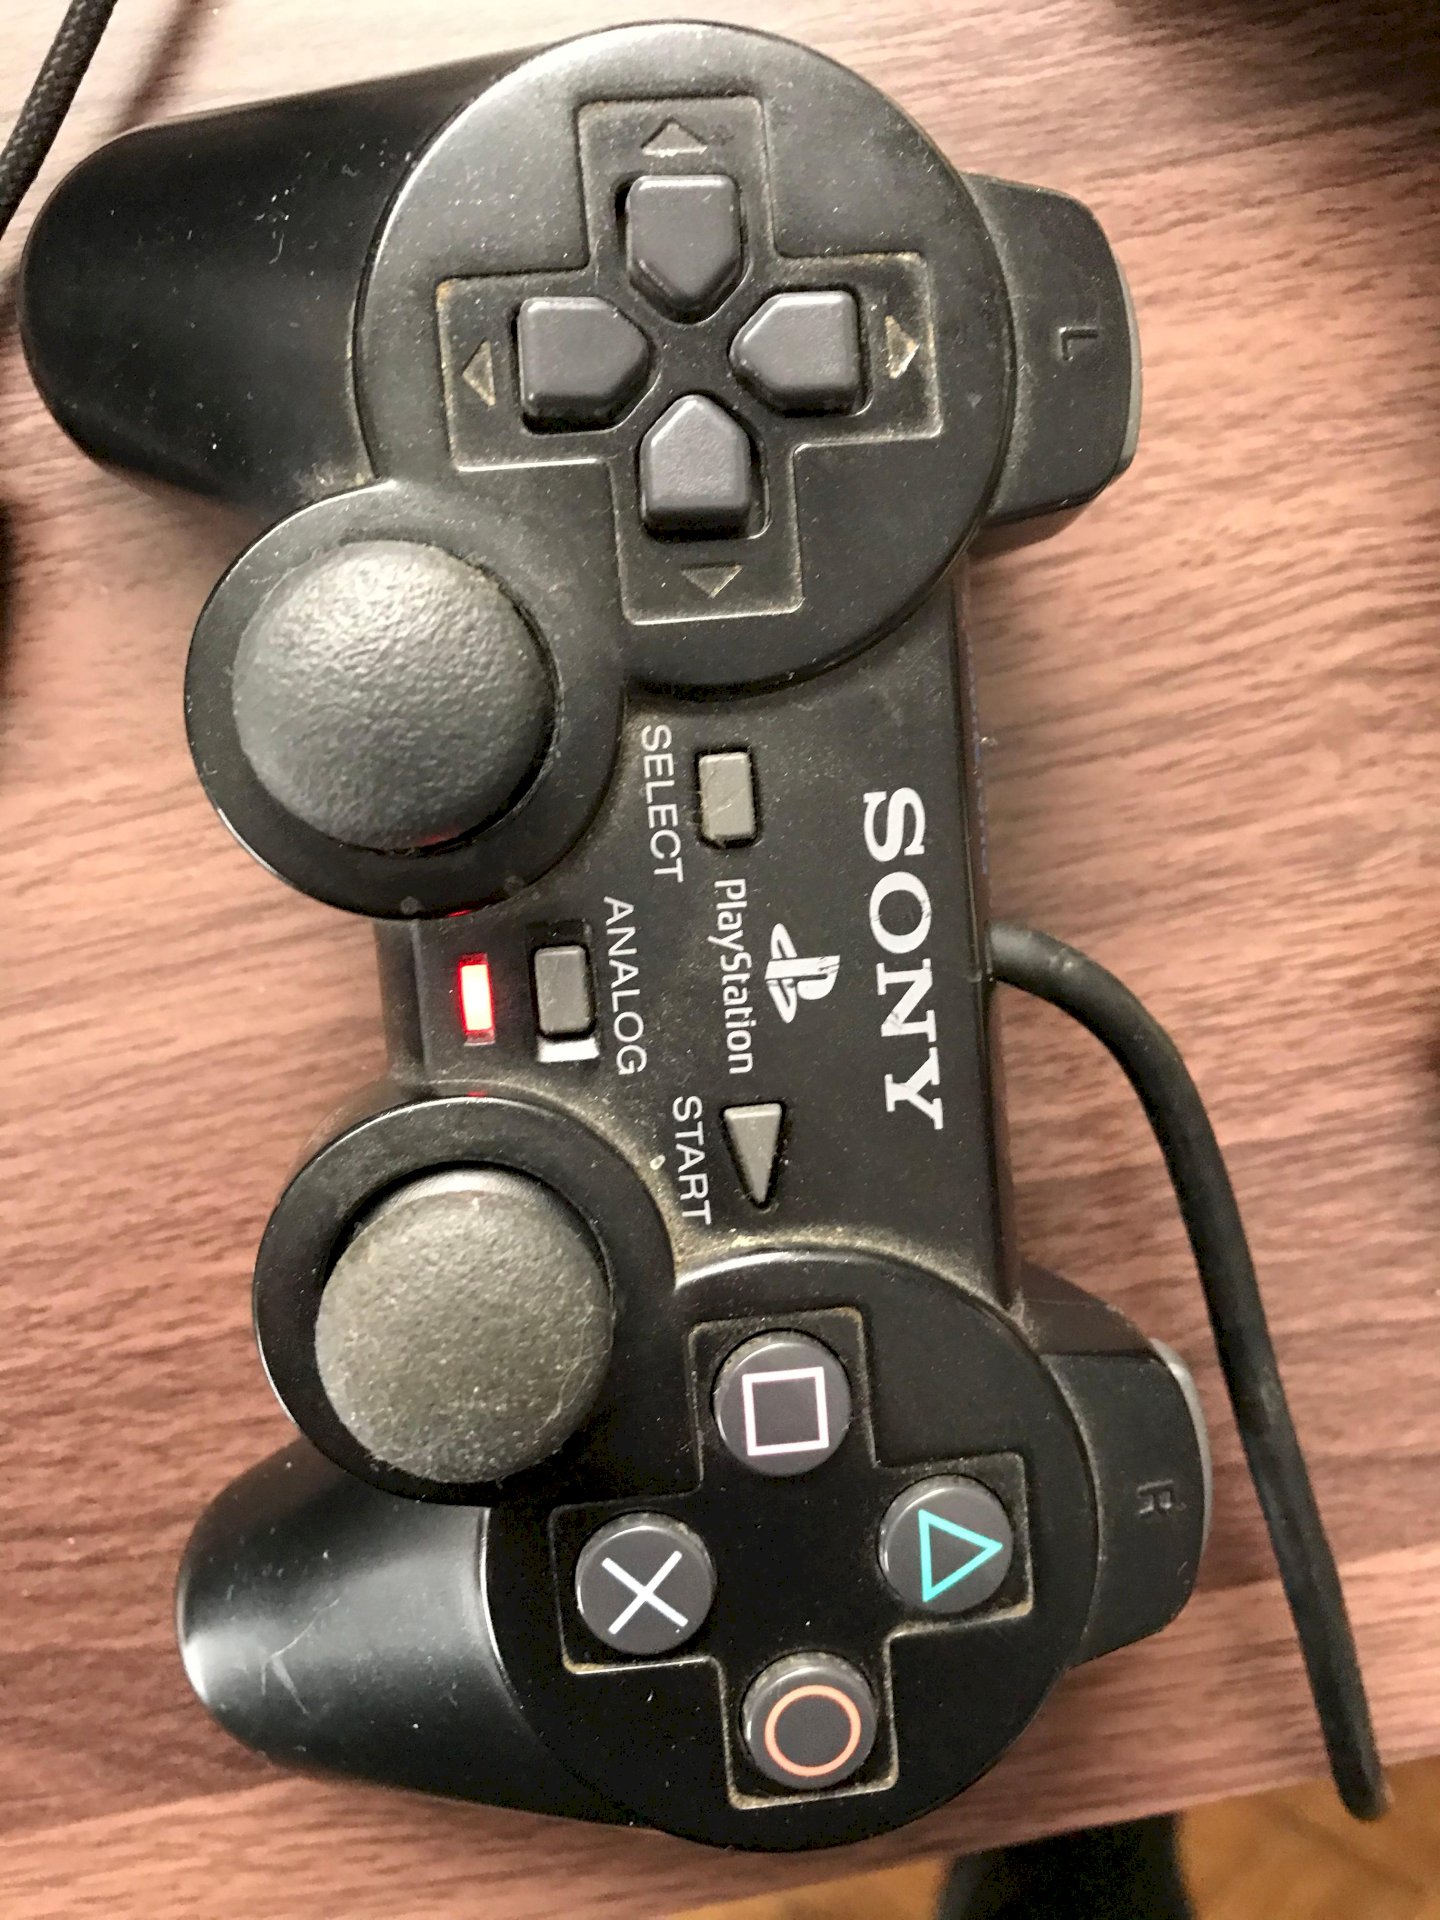 Playstation 2 controller error message while playing